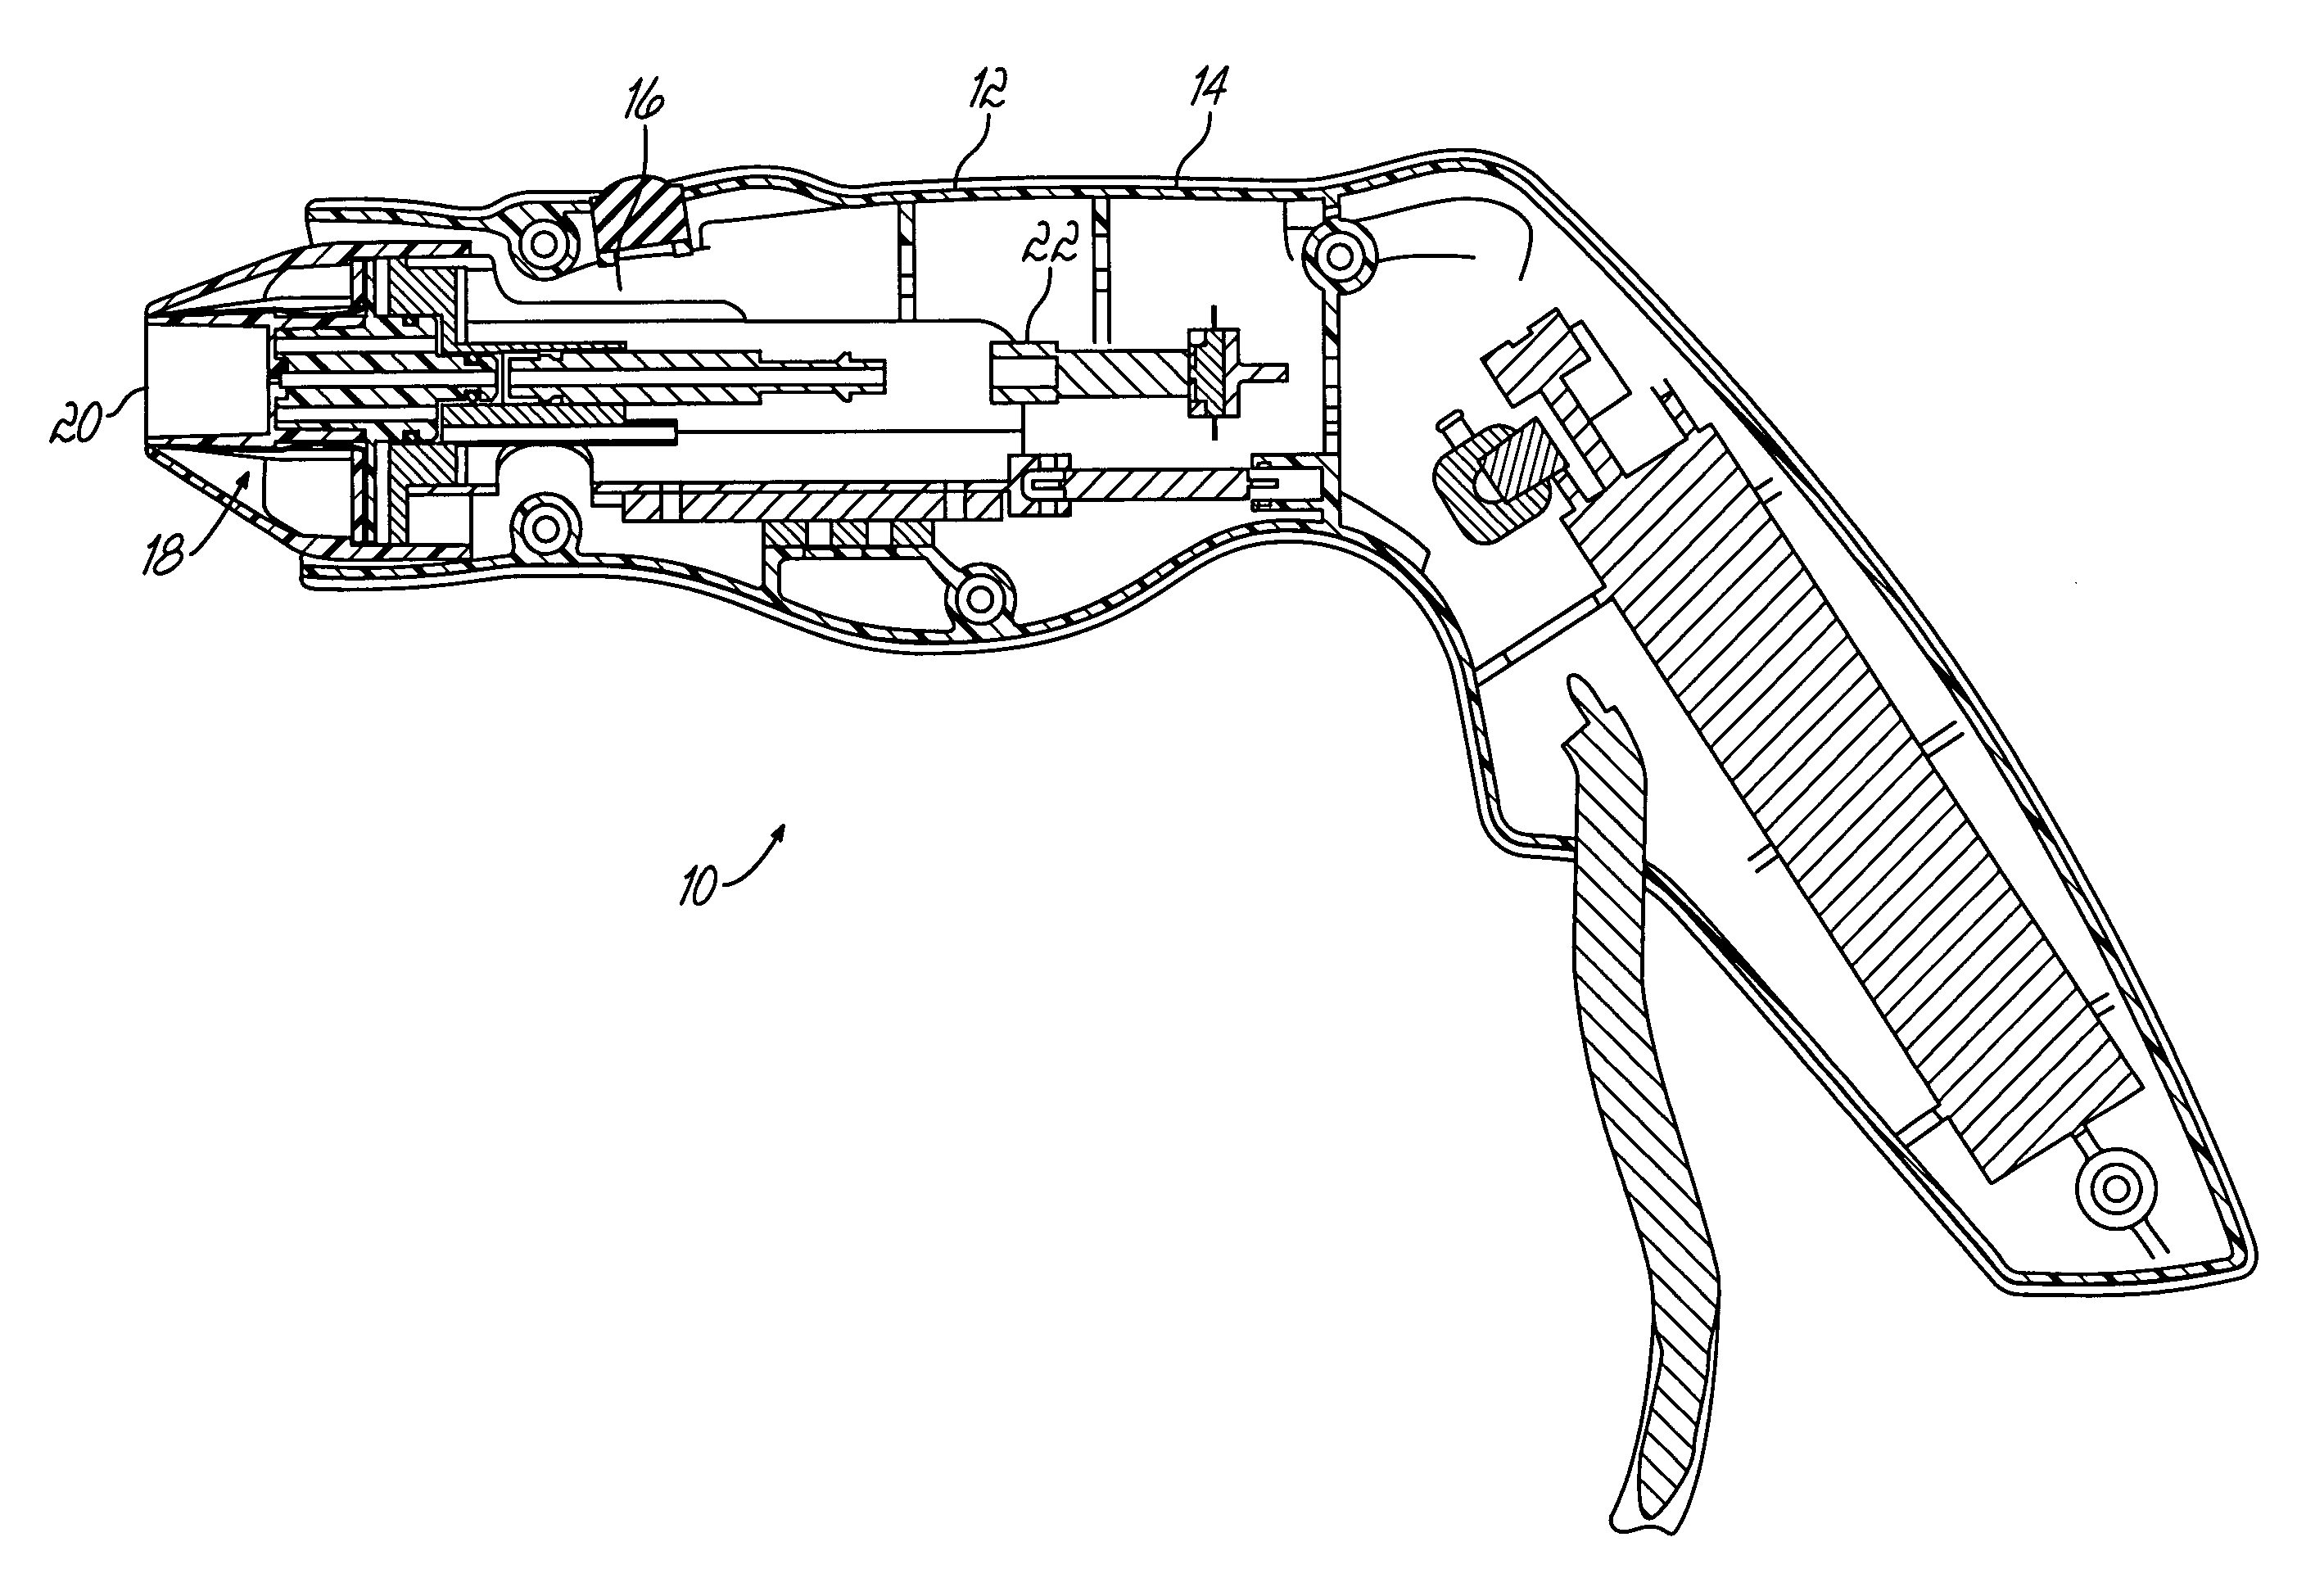 Handpiece for treatment of tissue